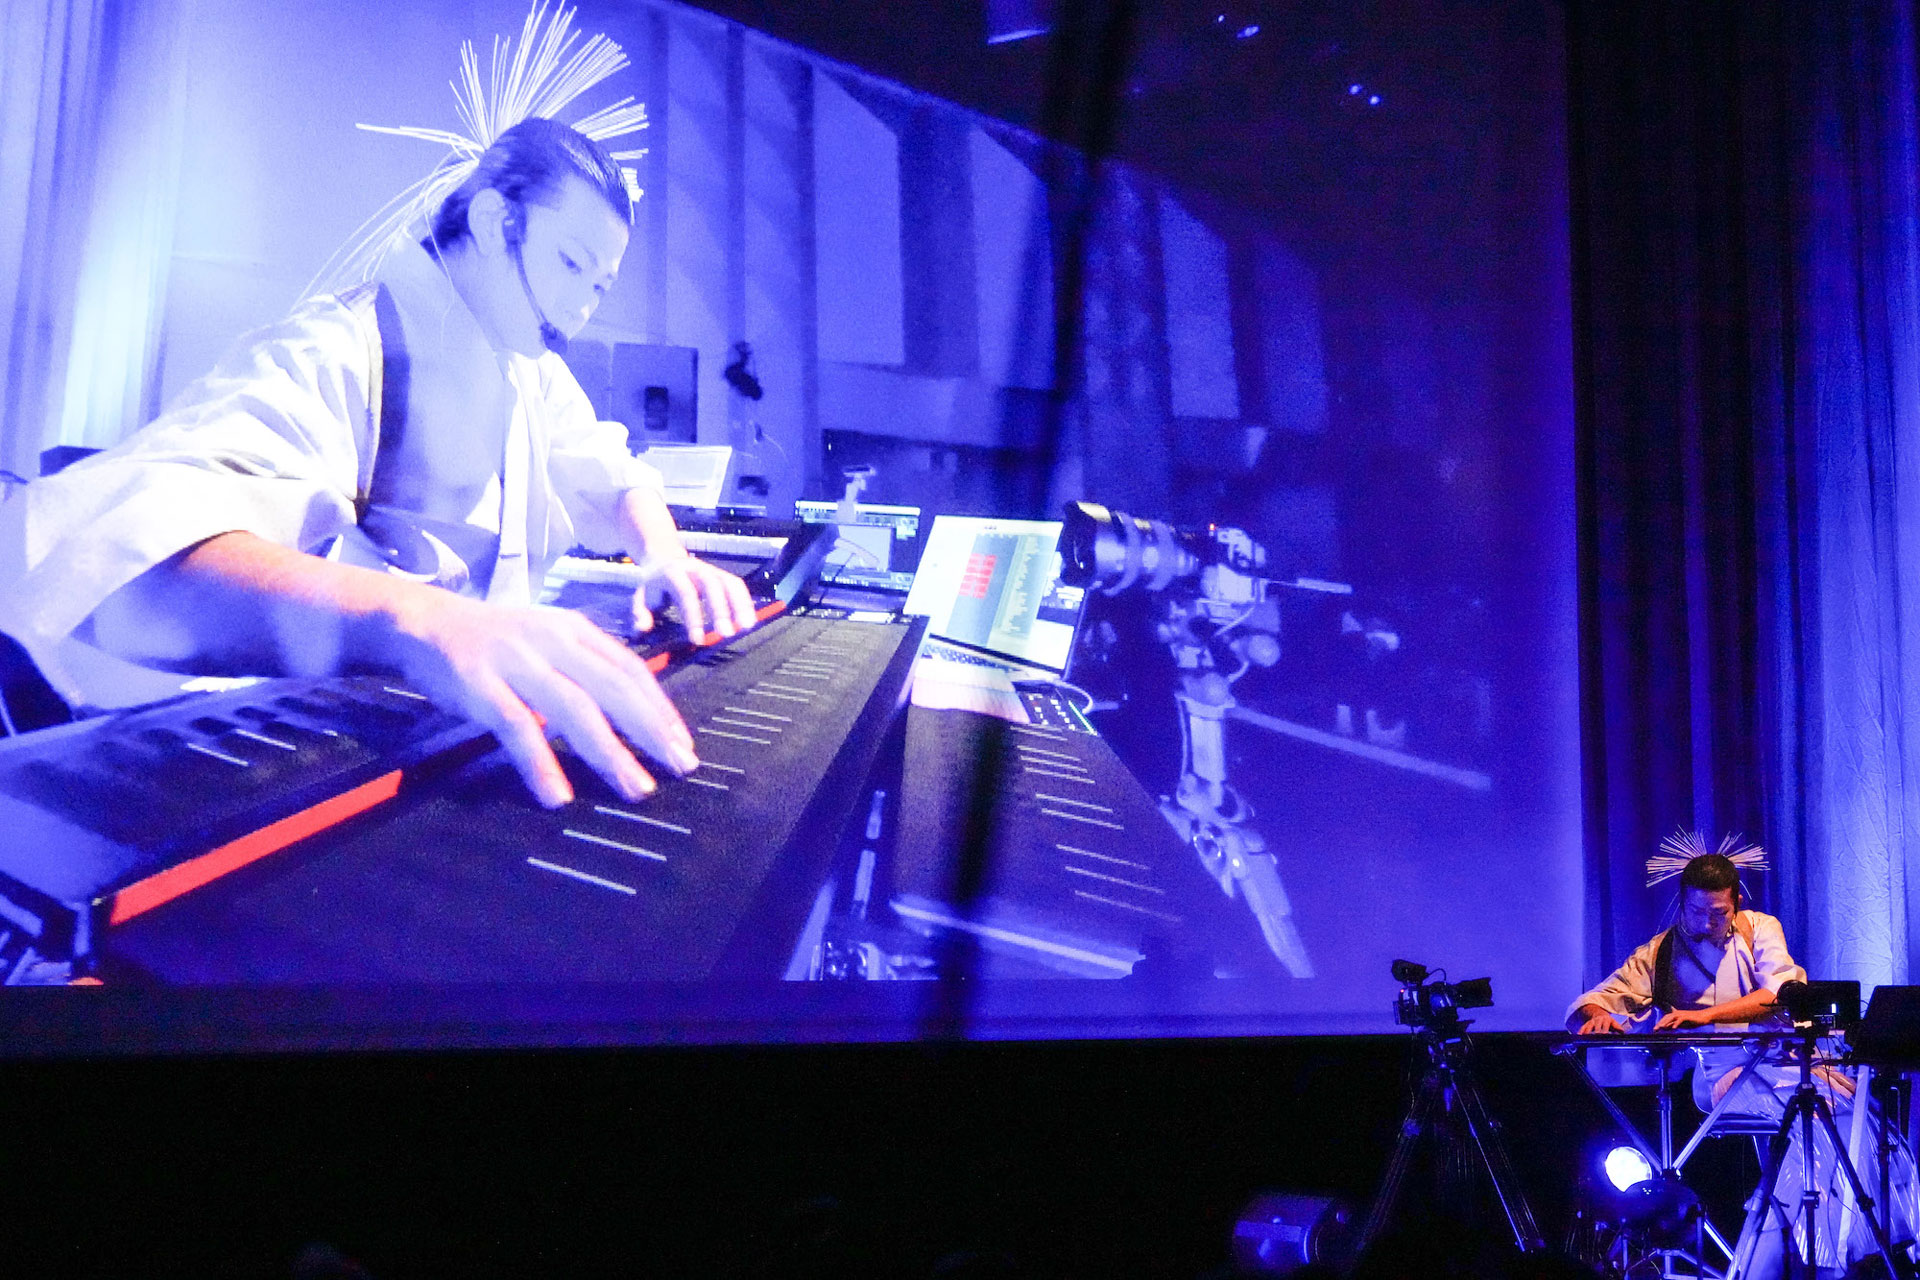 LIT Talent Awards - One Man Orchestra On The Cutting-Edge Electronic Instruments